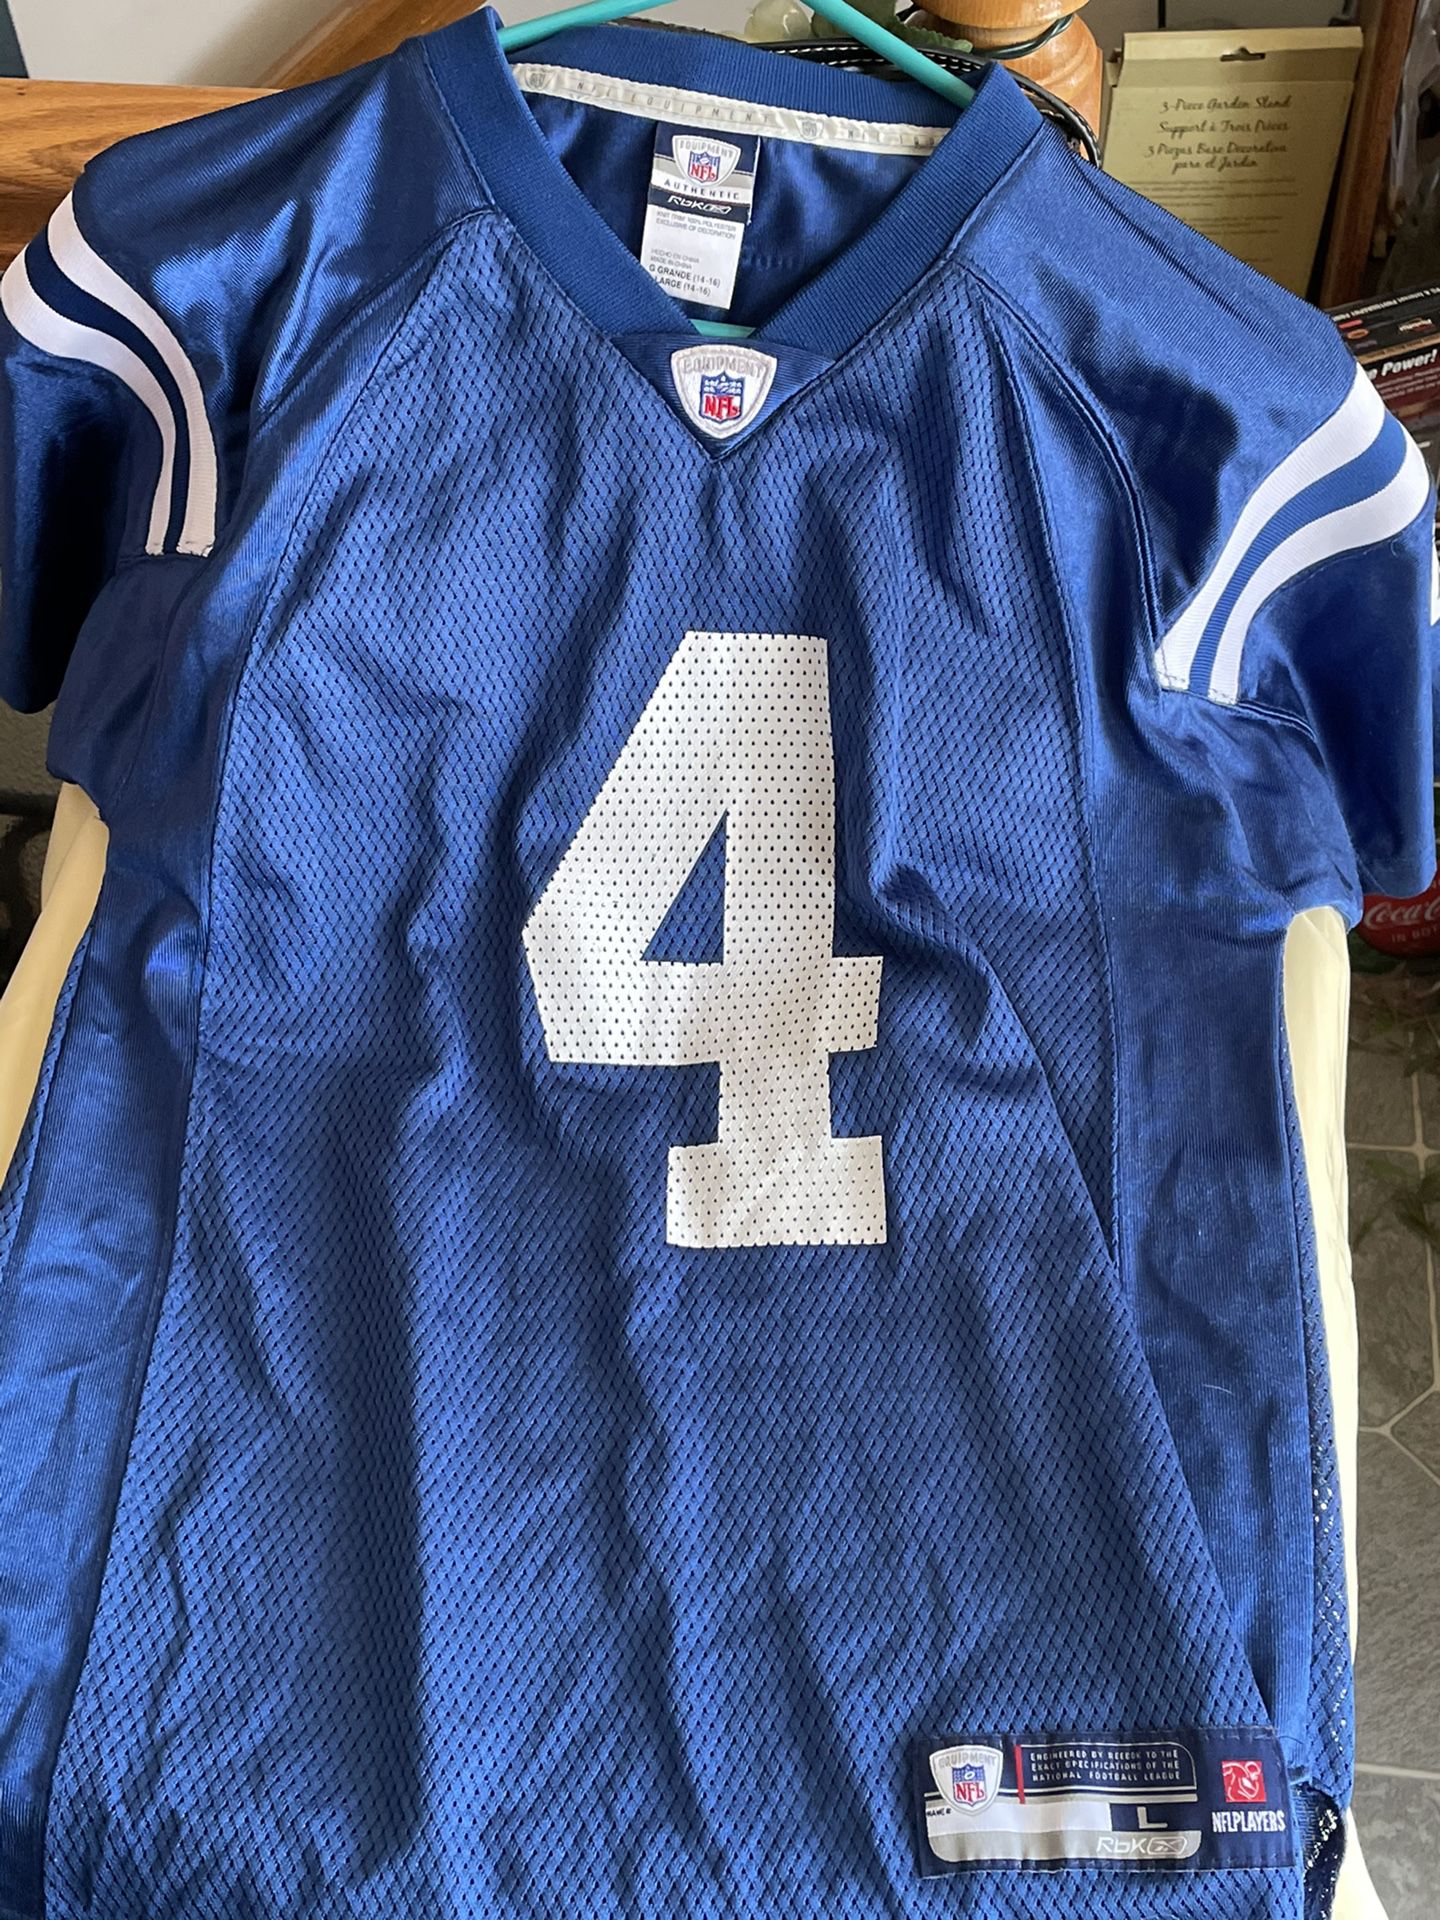 NFL Reebok Jersey Indianapolis Colts #4 . Nice